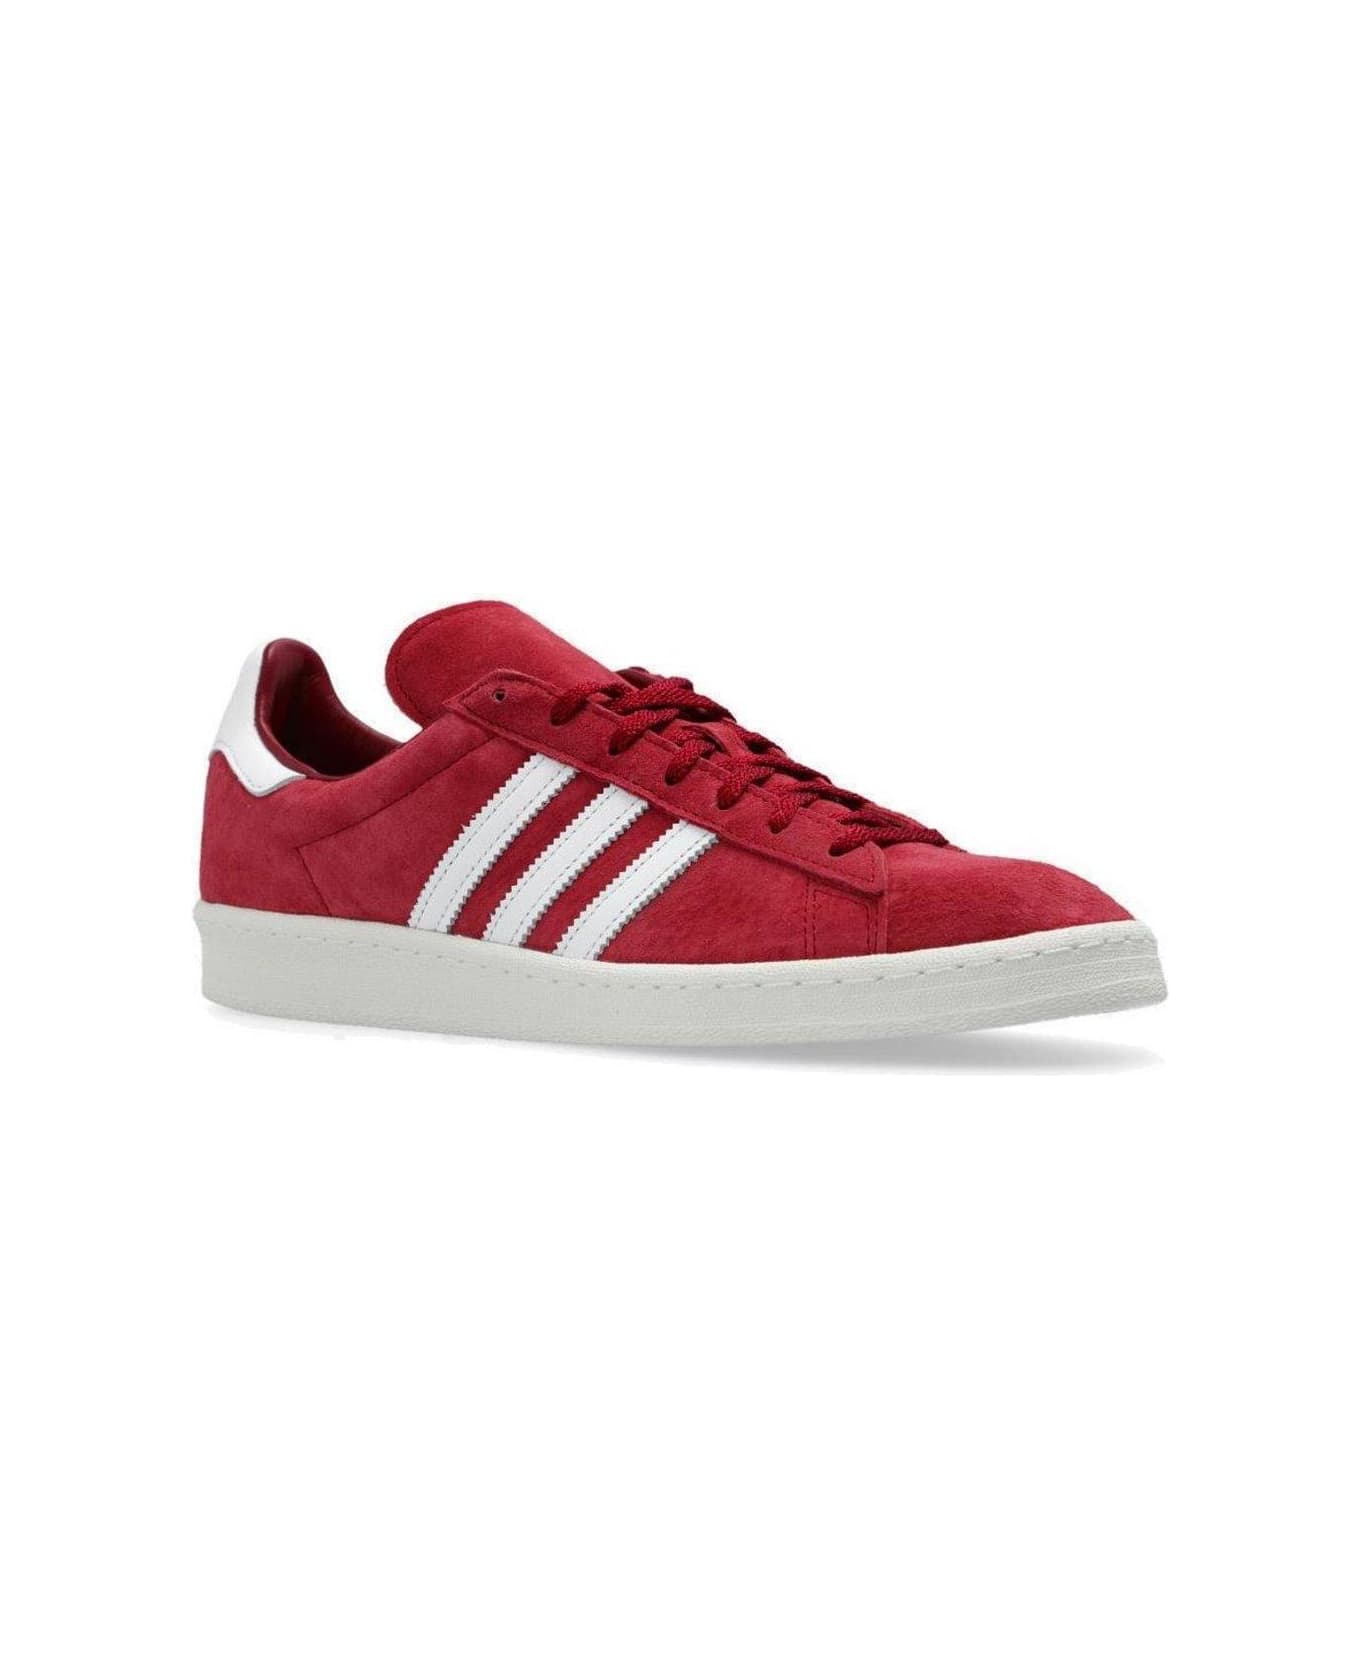 Adidas Campus 80s Lace-up Sneakers - RED